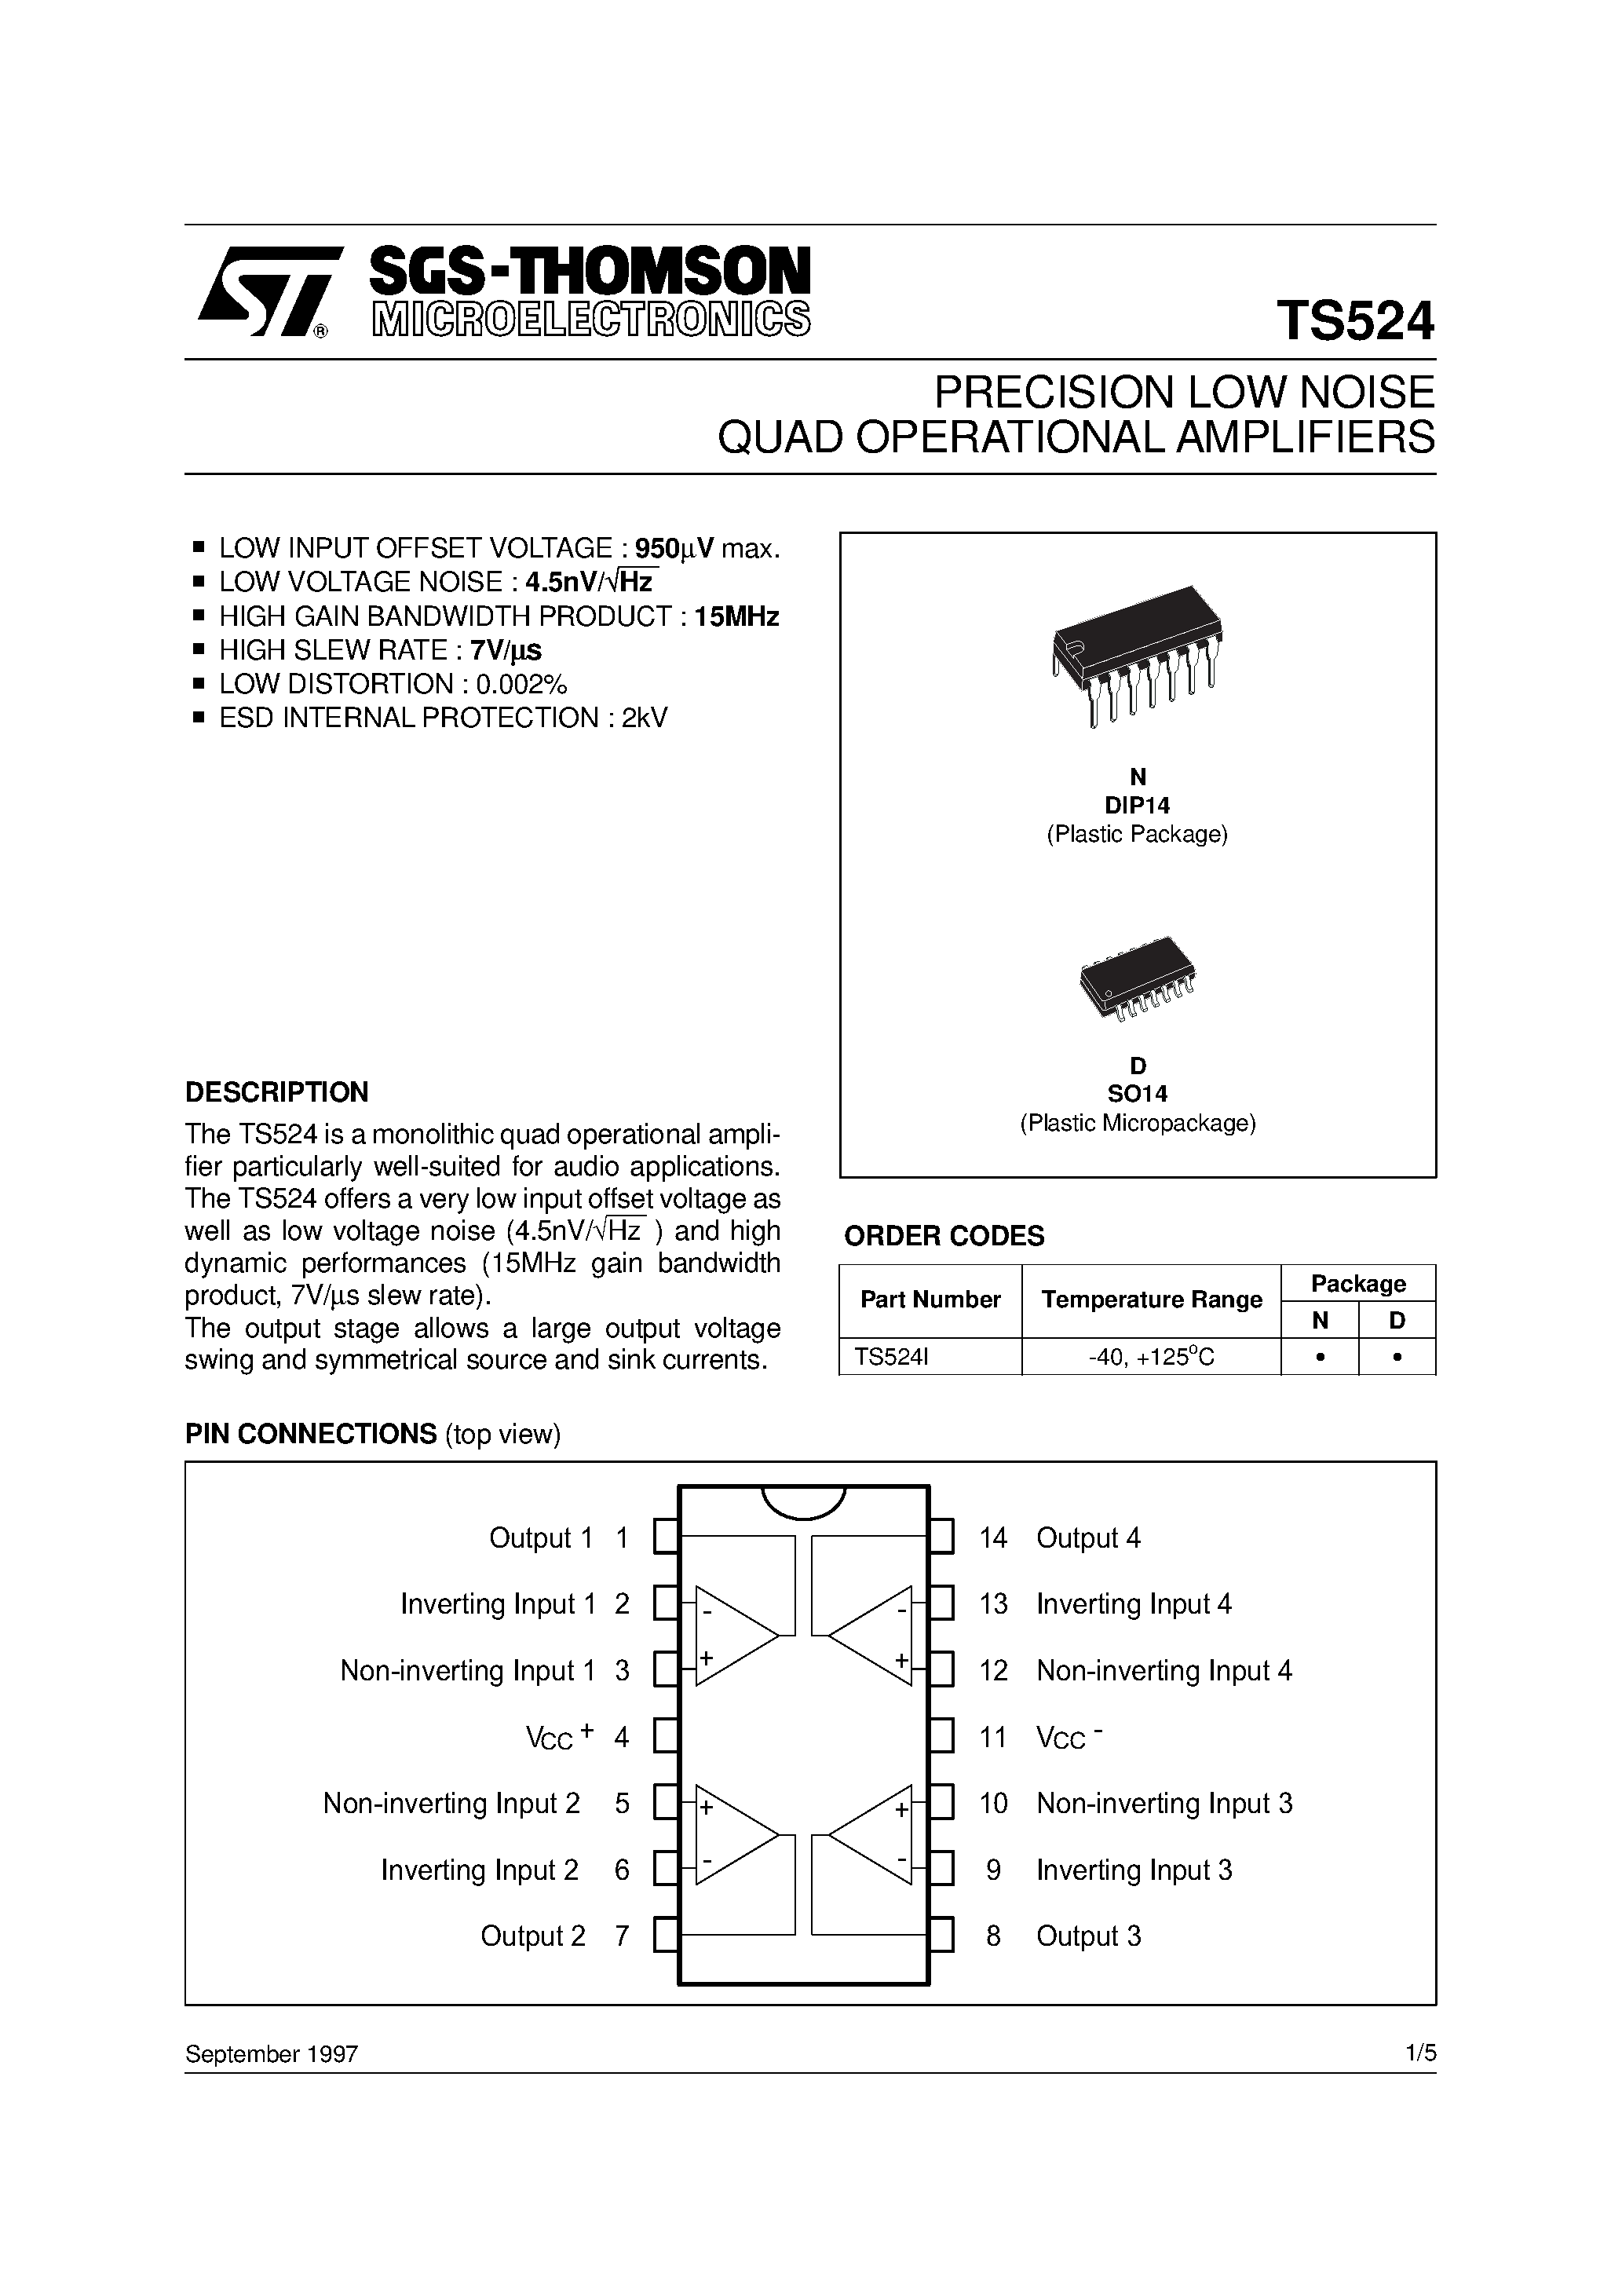 Datasheet TS524N - PRECISION LOW NOISE QUAD OPERATIONAL AMPLIFIERS page 1